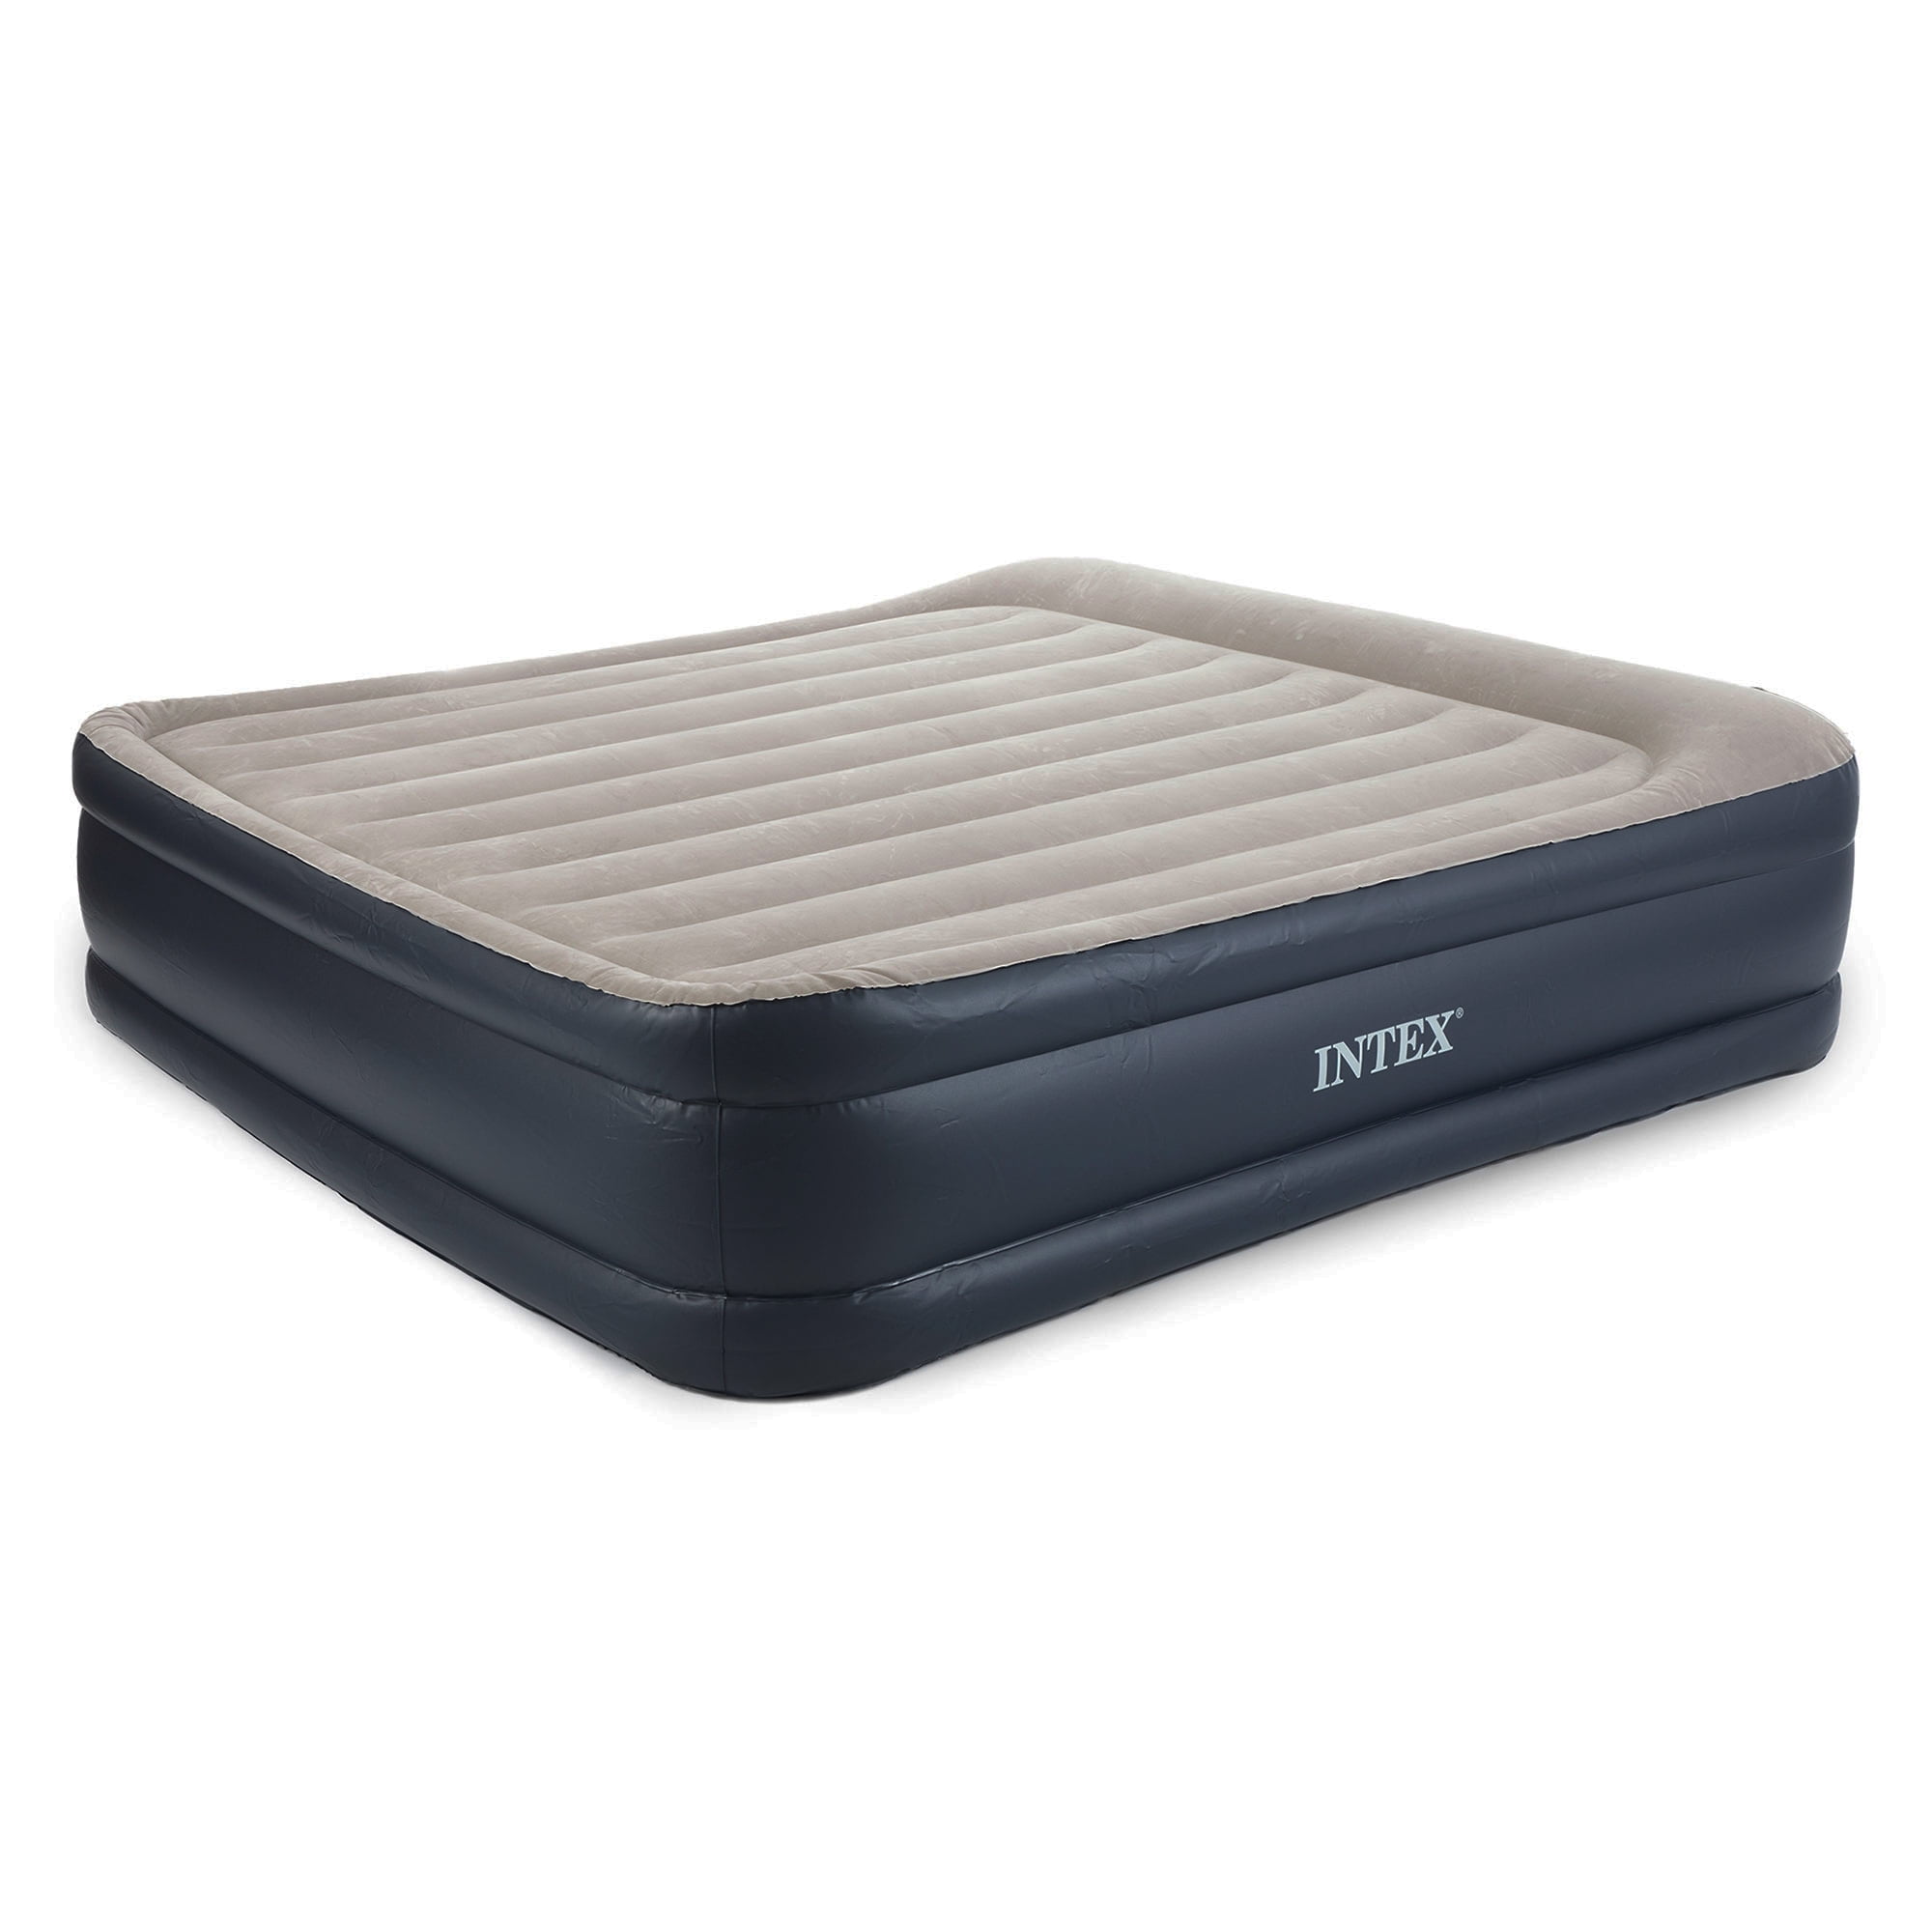 Intex Dura Beam 16.5 inch Deluxe Inflatable Air Mattress Bed with Built in Pump King for sale online 